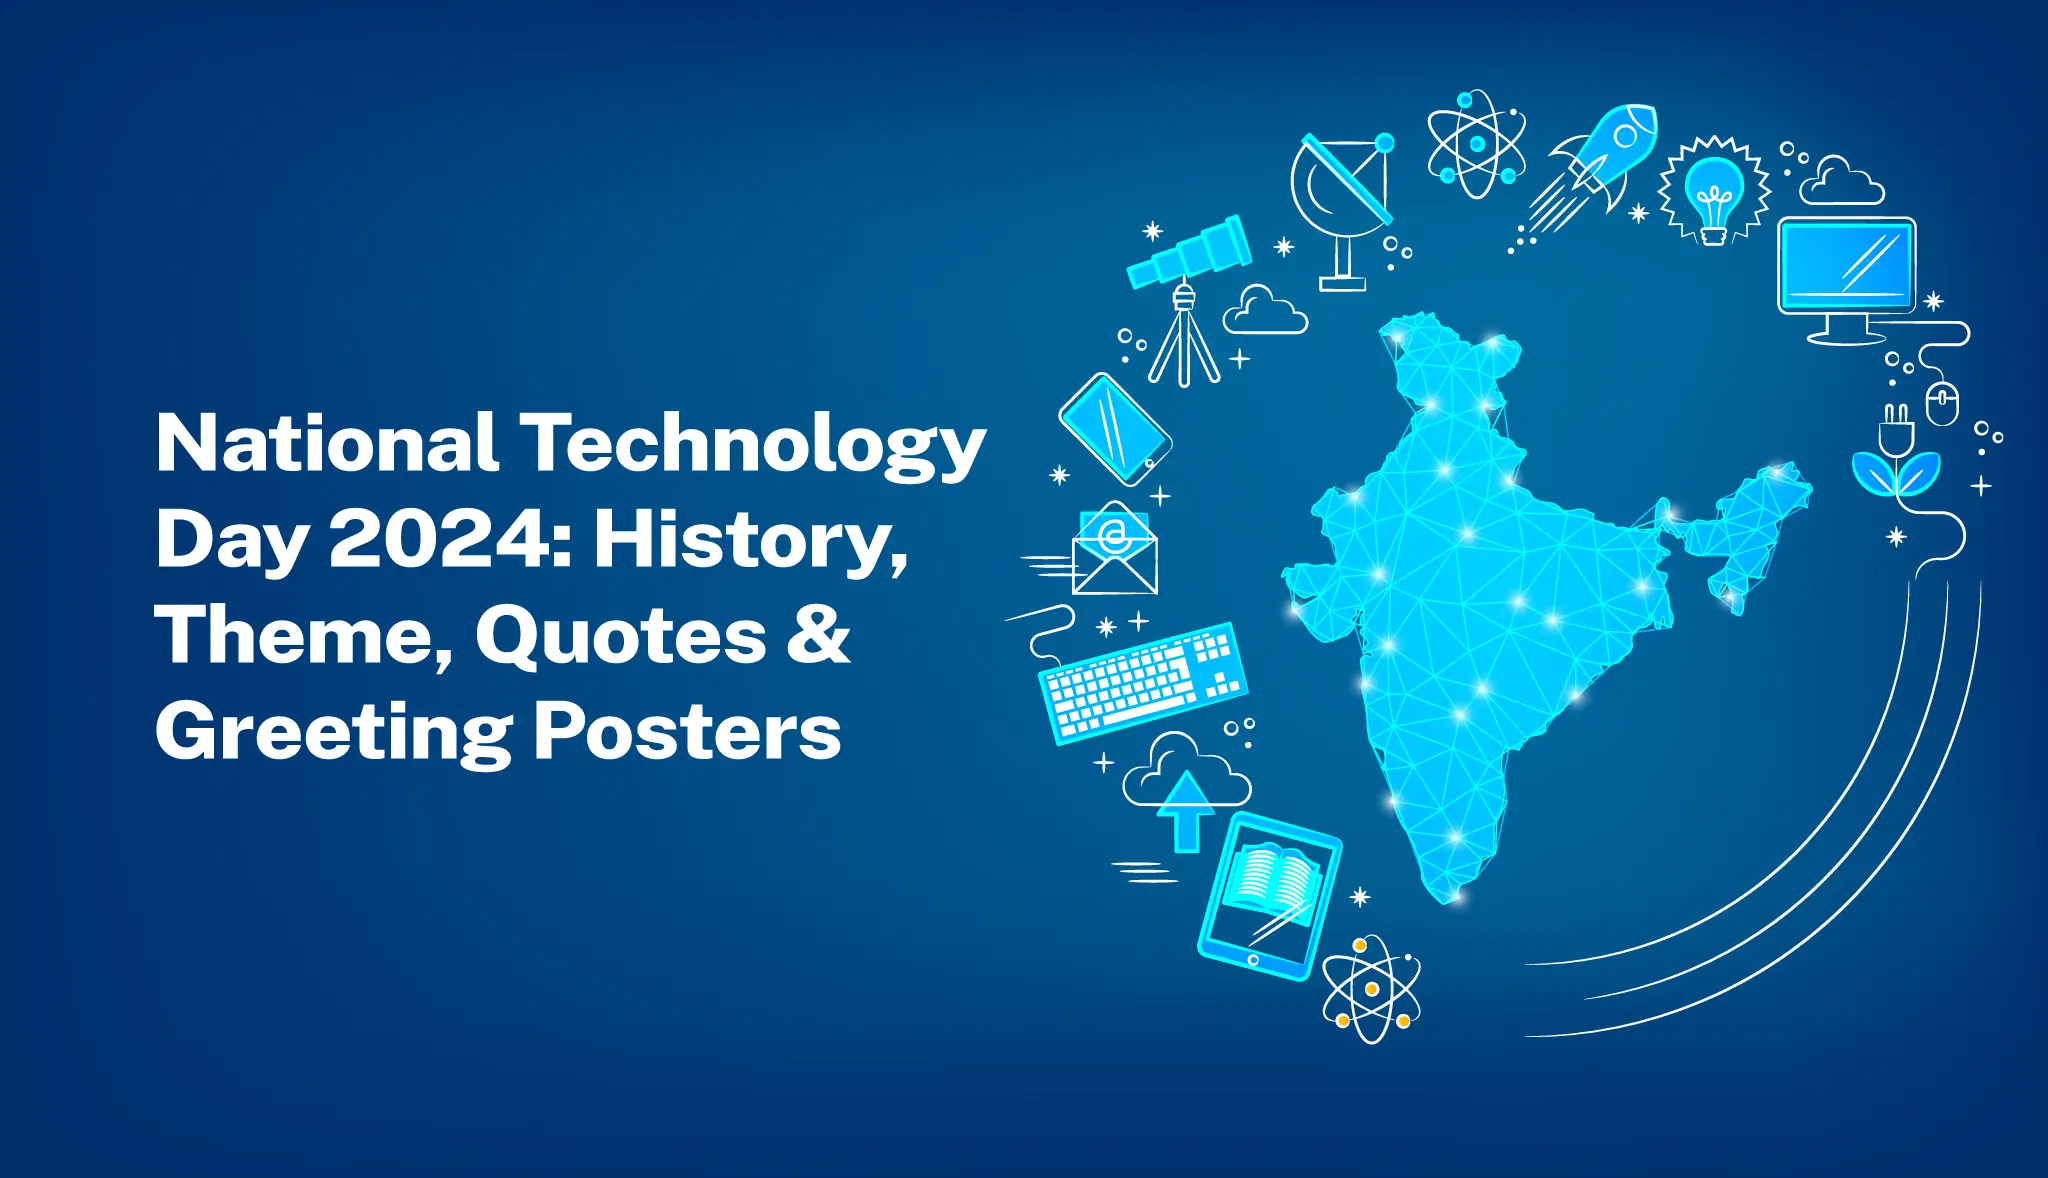 National Technology Day 2024: History, Theme, Quotes & Posters - Postive